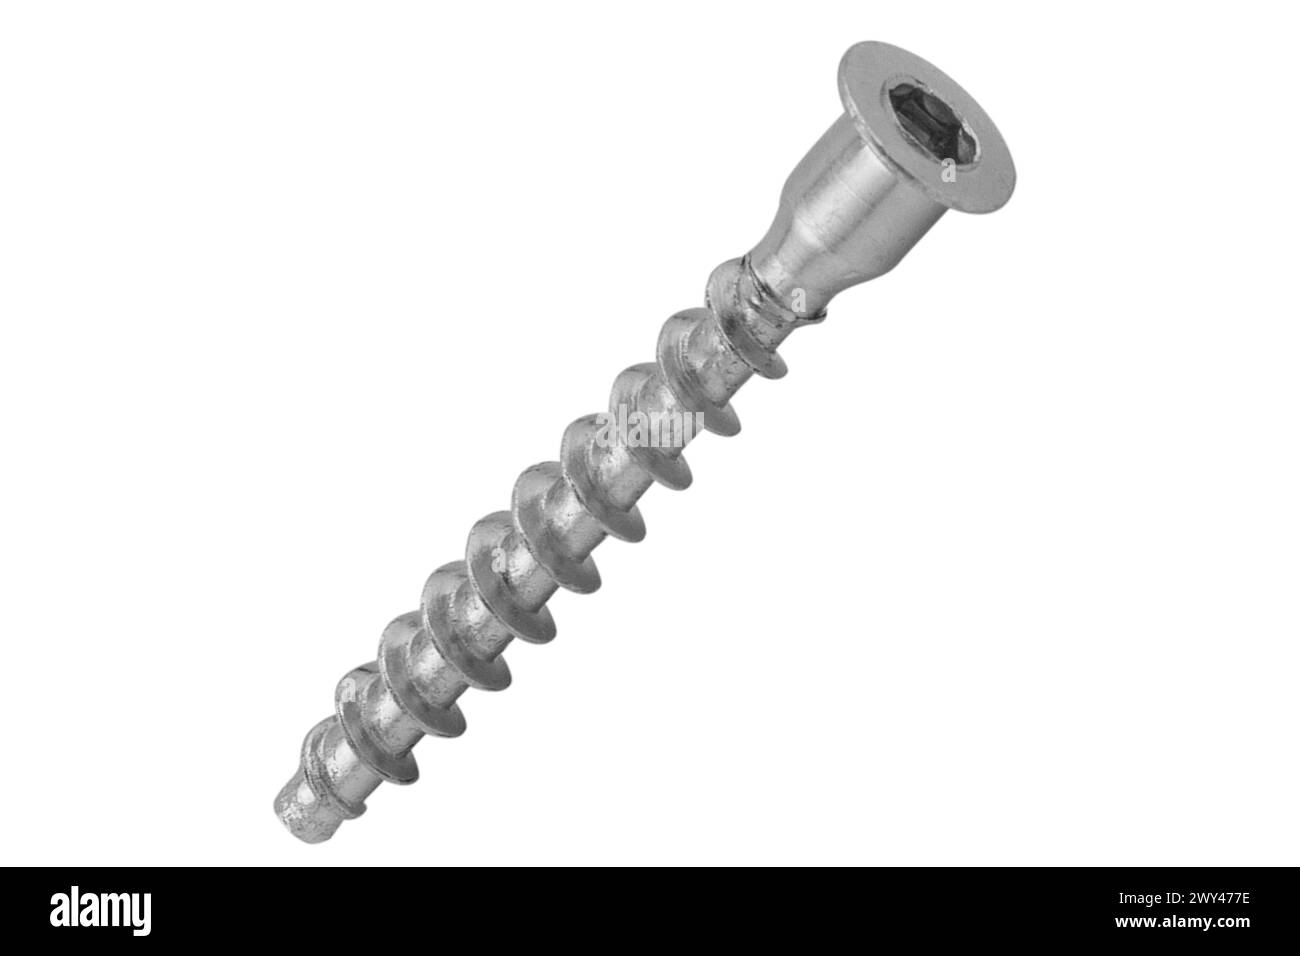 Screw  isolated on white backgroun. Macro shot metal self-tapping screw. Chromed screw bolt isolated. Nuts and bolts. Tools for work. Stock Photo